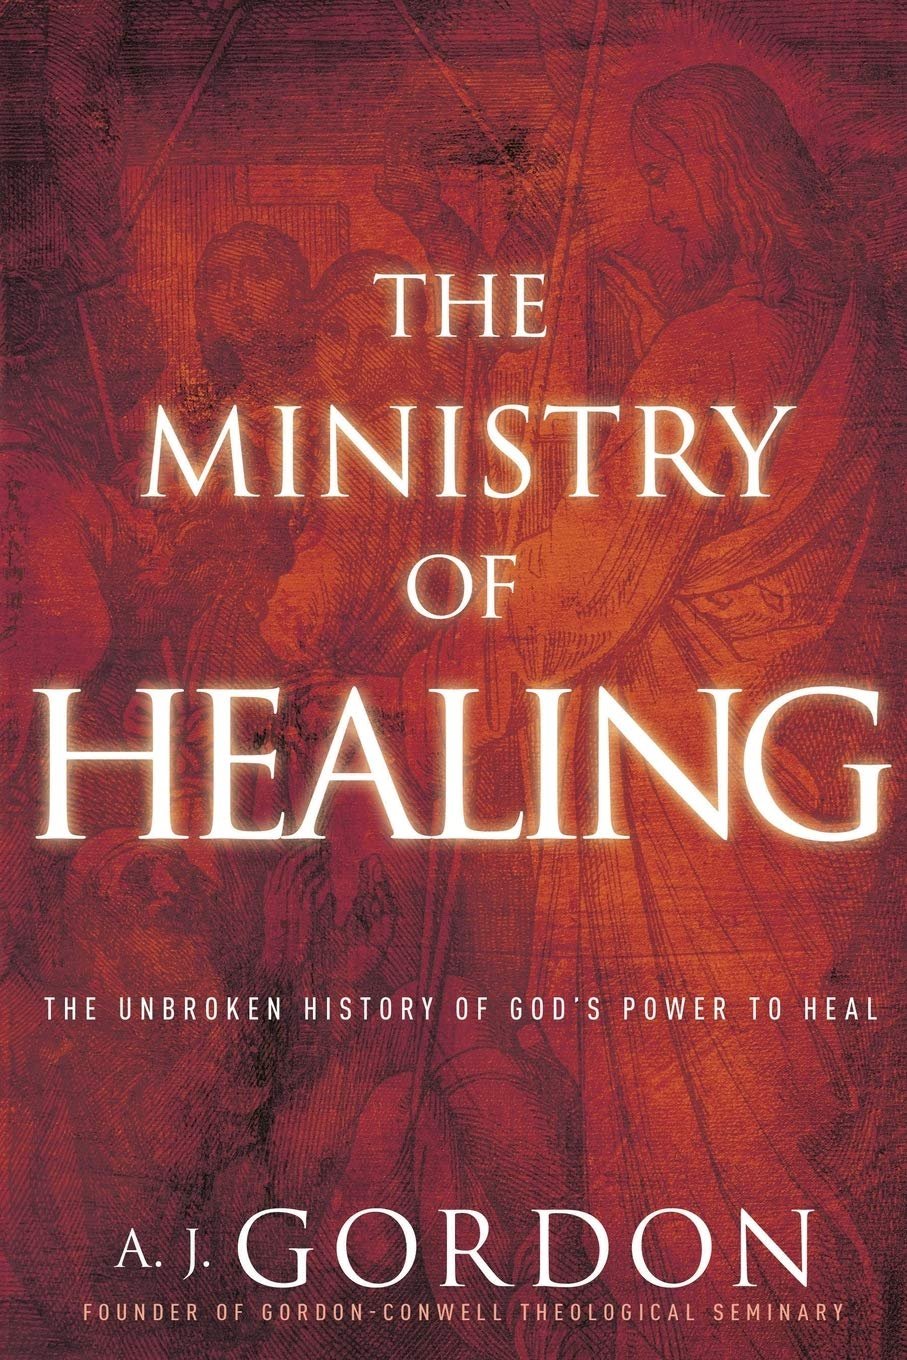 The Ministry of Healing: The Unbroken History of God’s Power to Heal (Timeless Christian Classics)